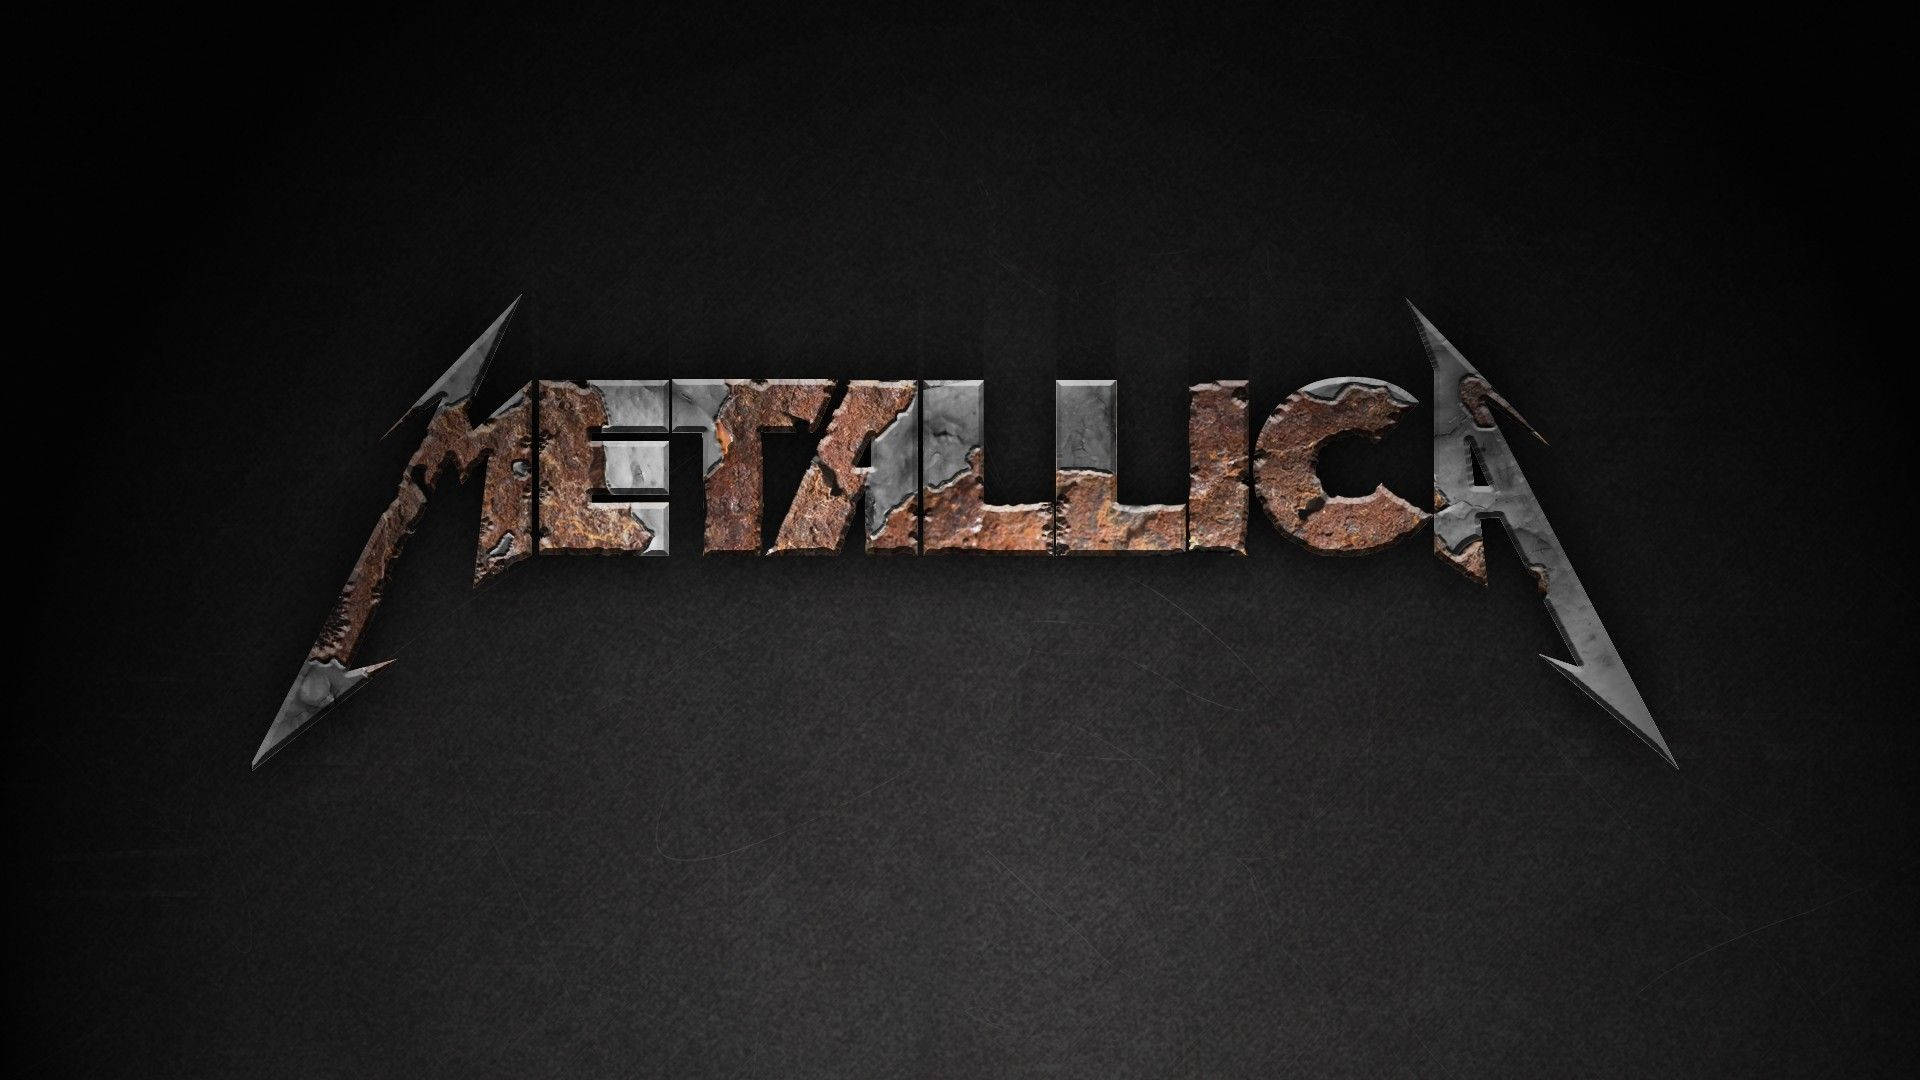 Metallica 1920X1080 Wallpaper and Background Image